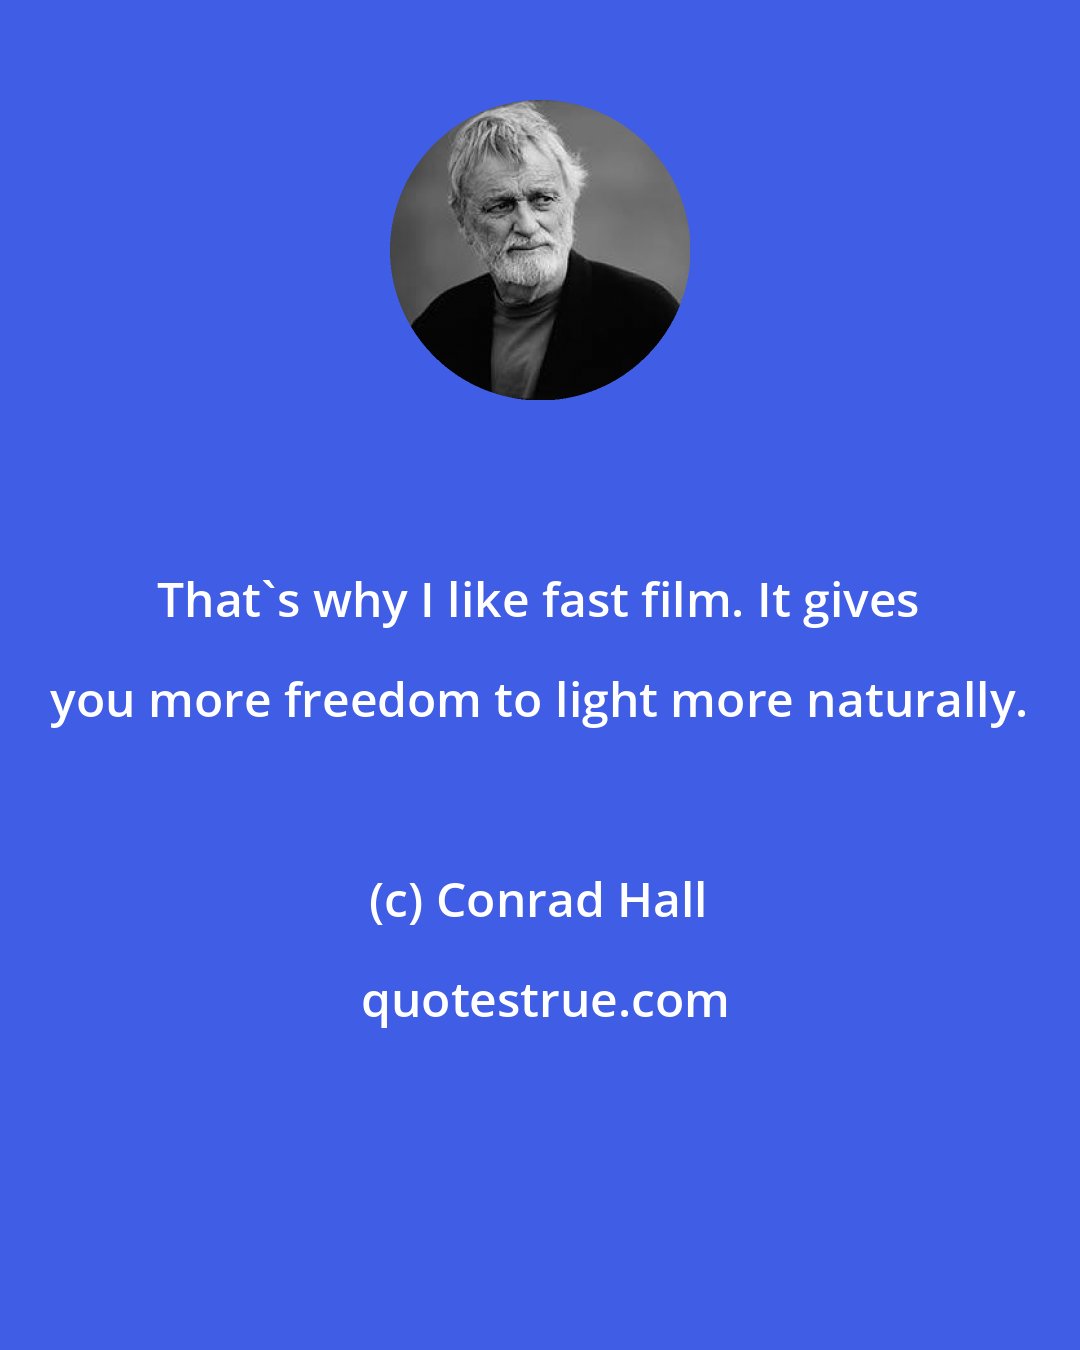 Conrad Hall: That's why I like fast film. It gives you more freedom to light more naturally.